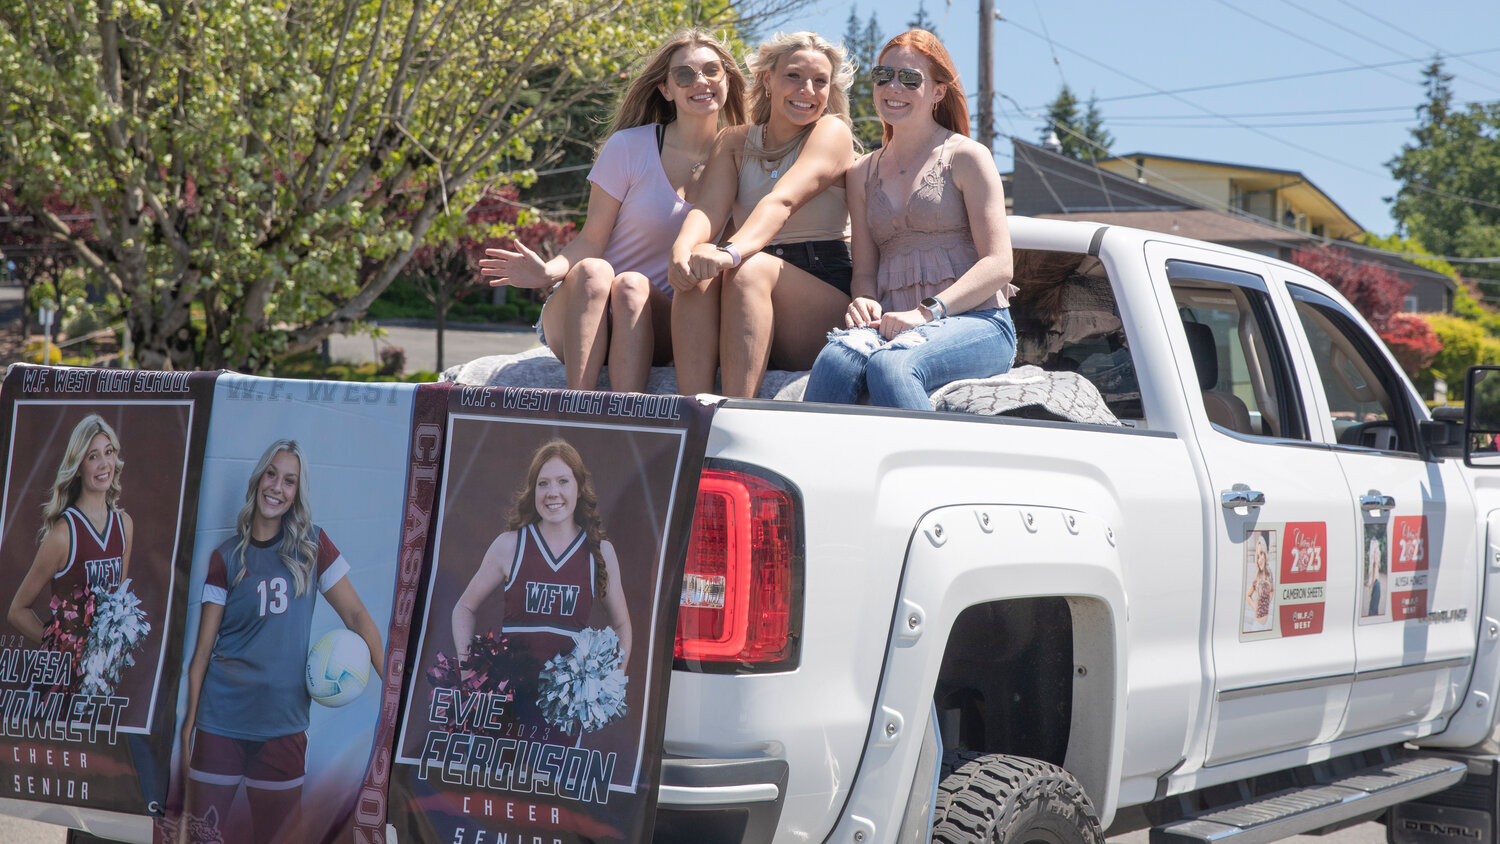 W.F. West High School seniors Alyssa Howlett, Cameron Sheets and Evie Ferguson smile for a photo during a parade honoring future graduates in Chehalis on Sunday, June 4.